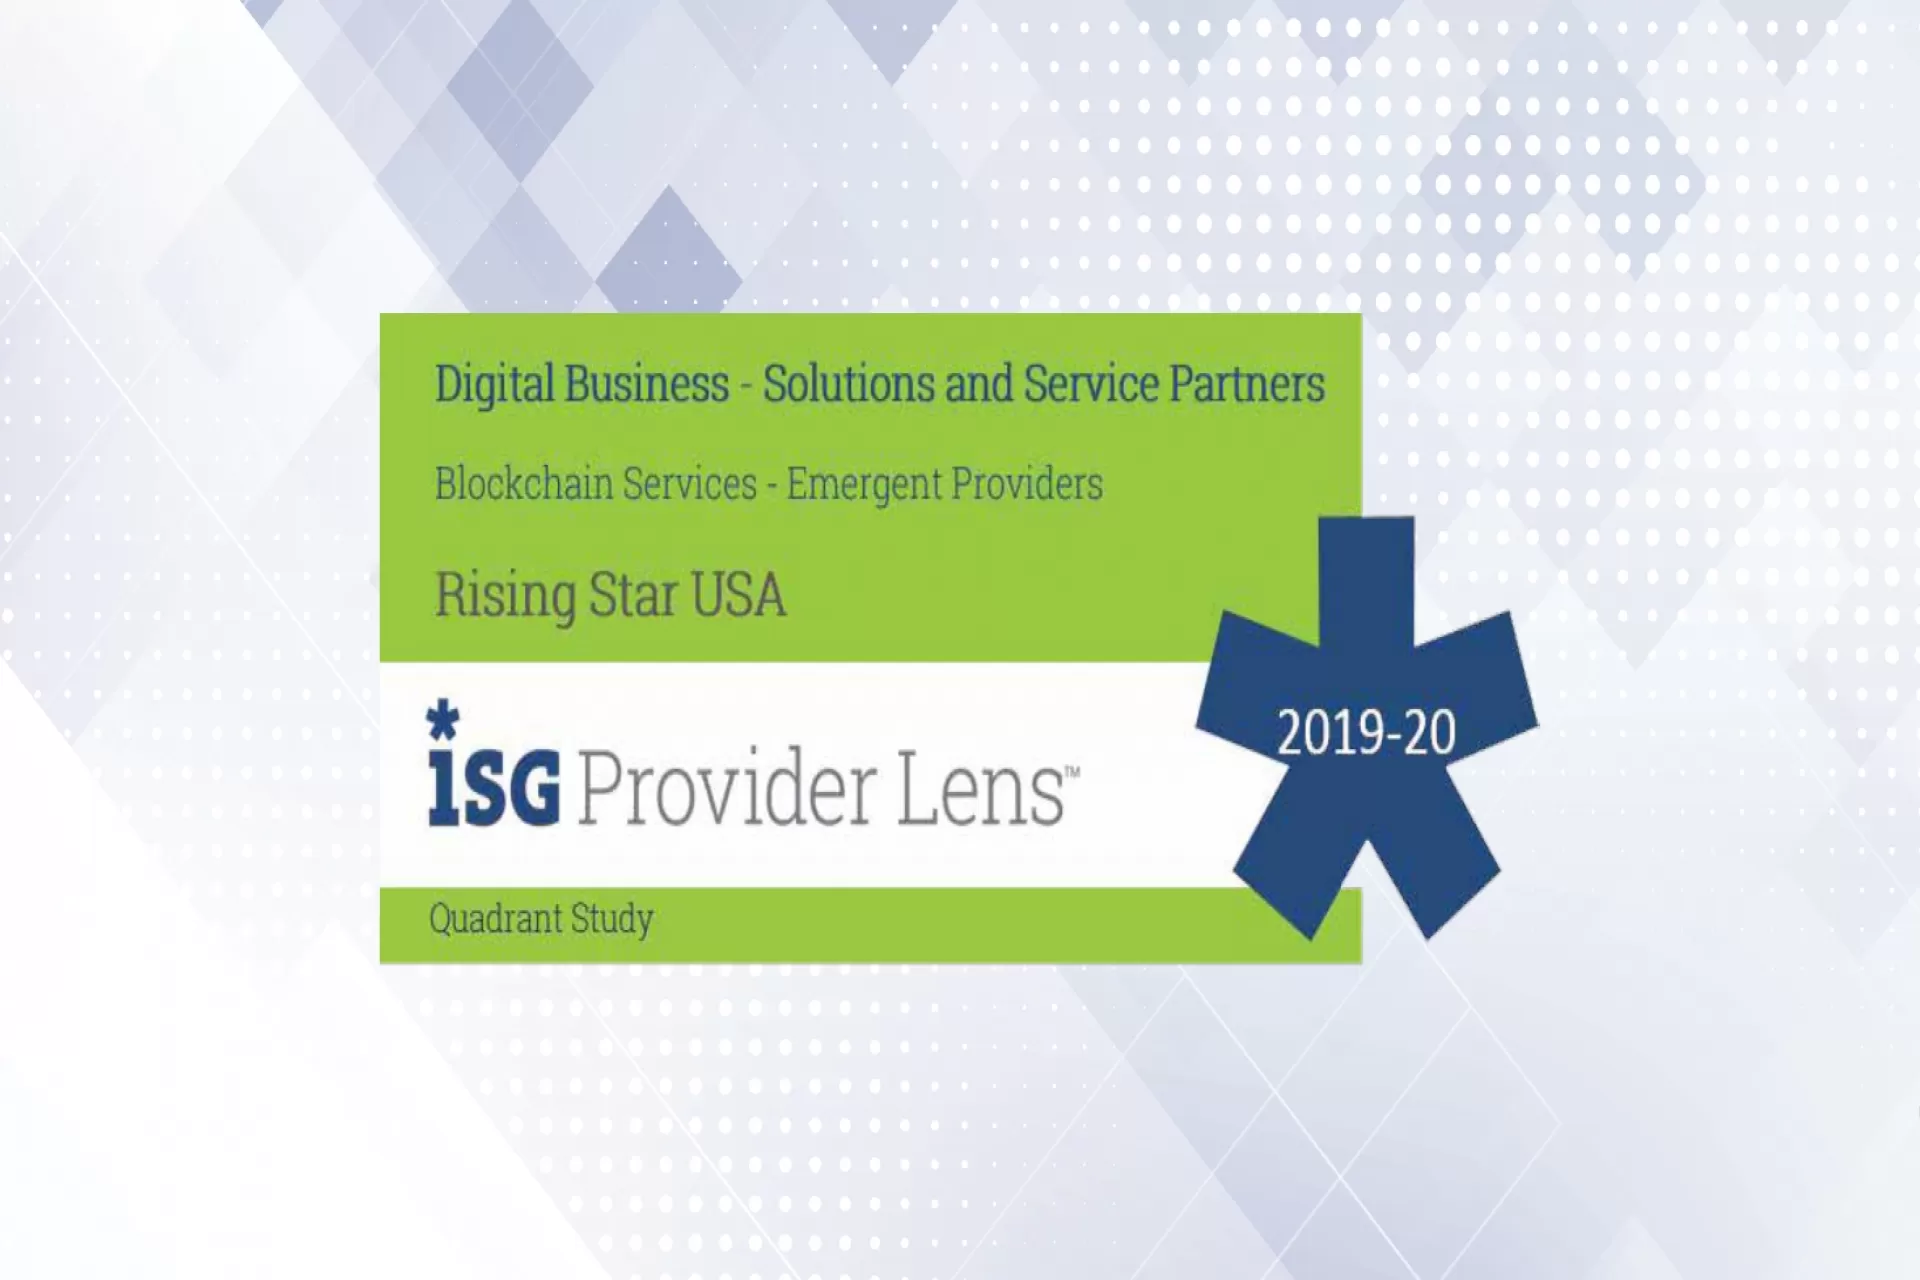 Zensar recognized in ISG Provider Lens™ Digital Business Solutions and Service Partners U.S. 2019-20